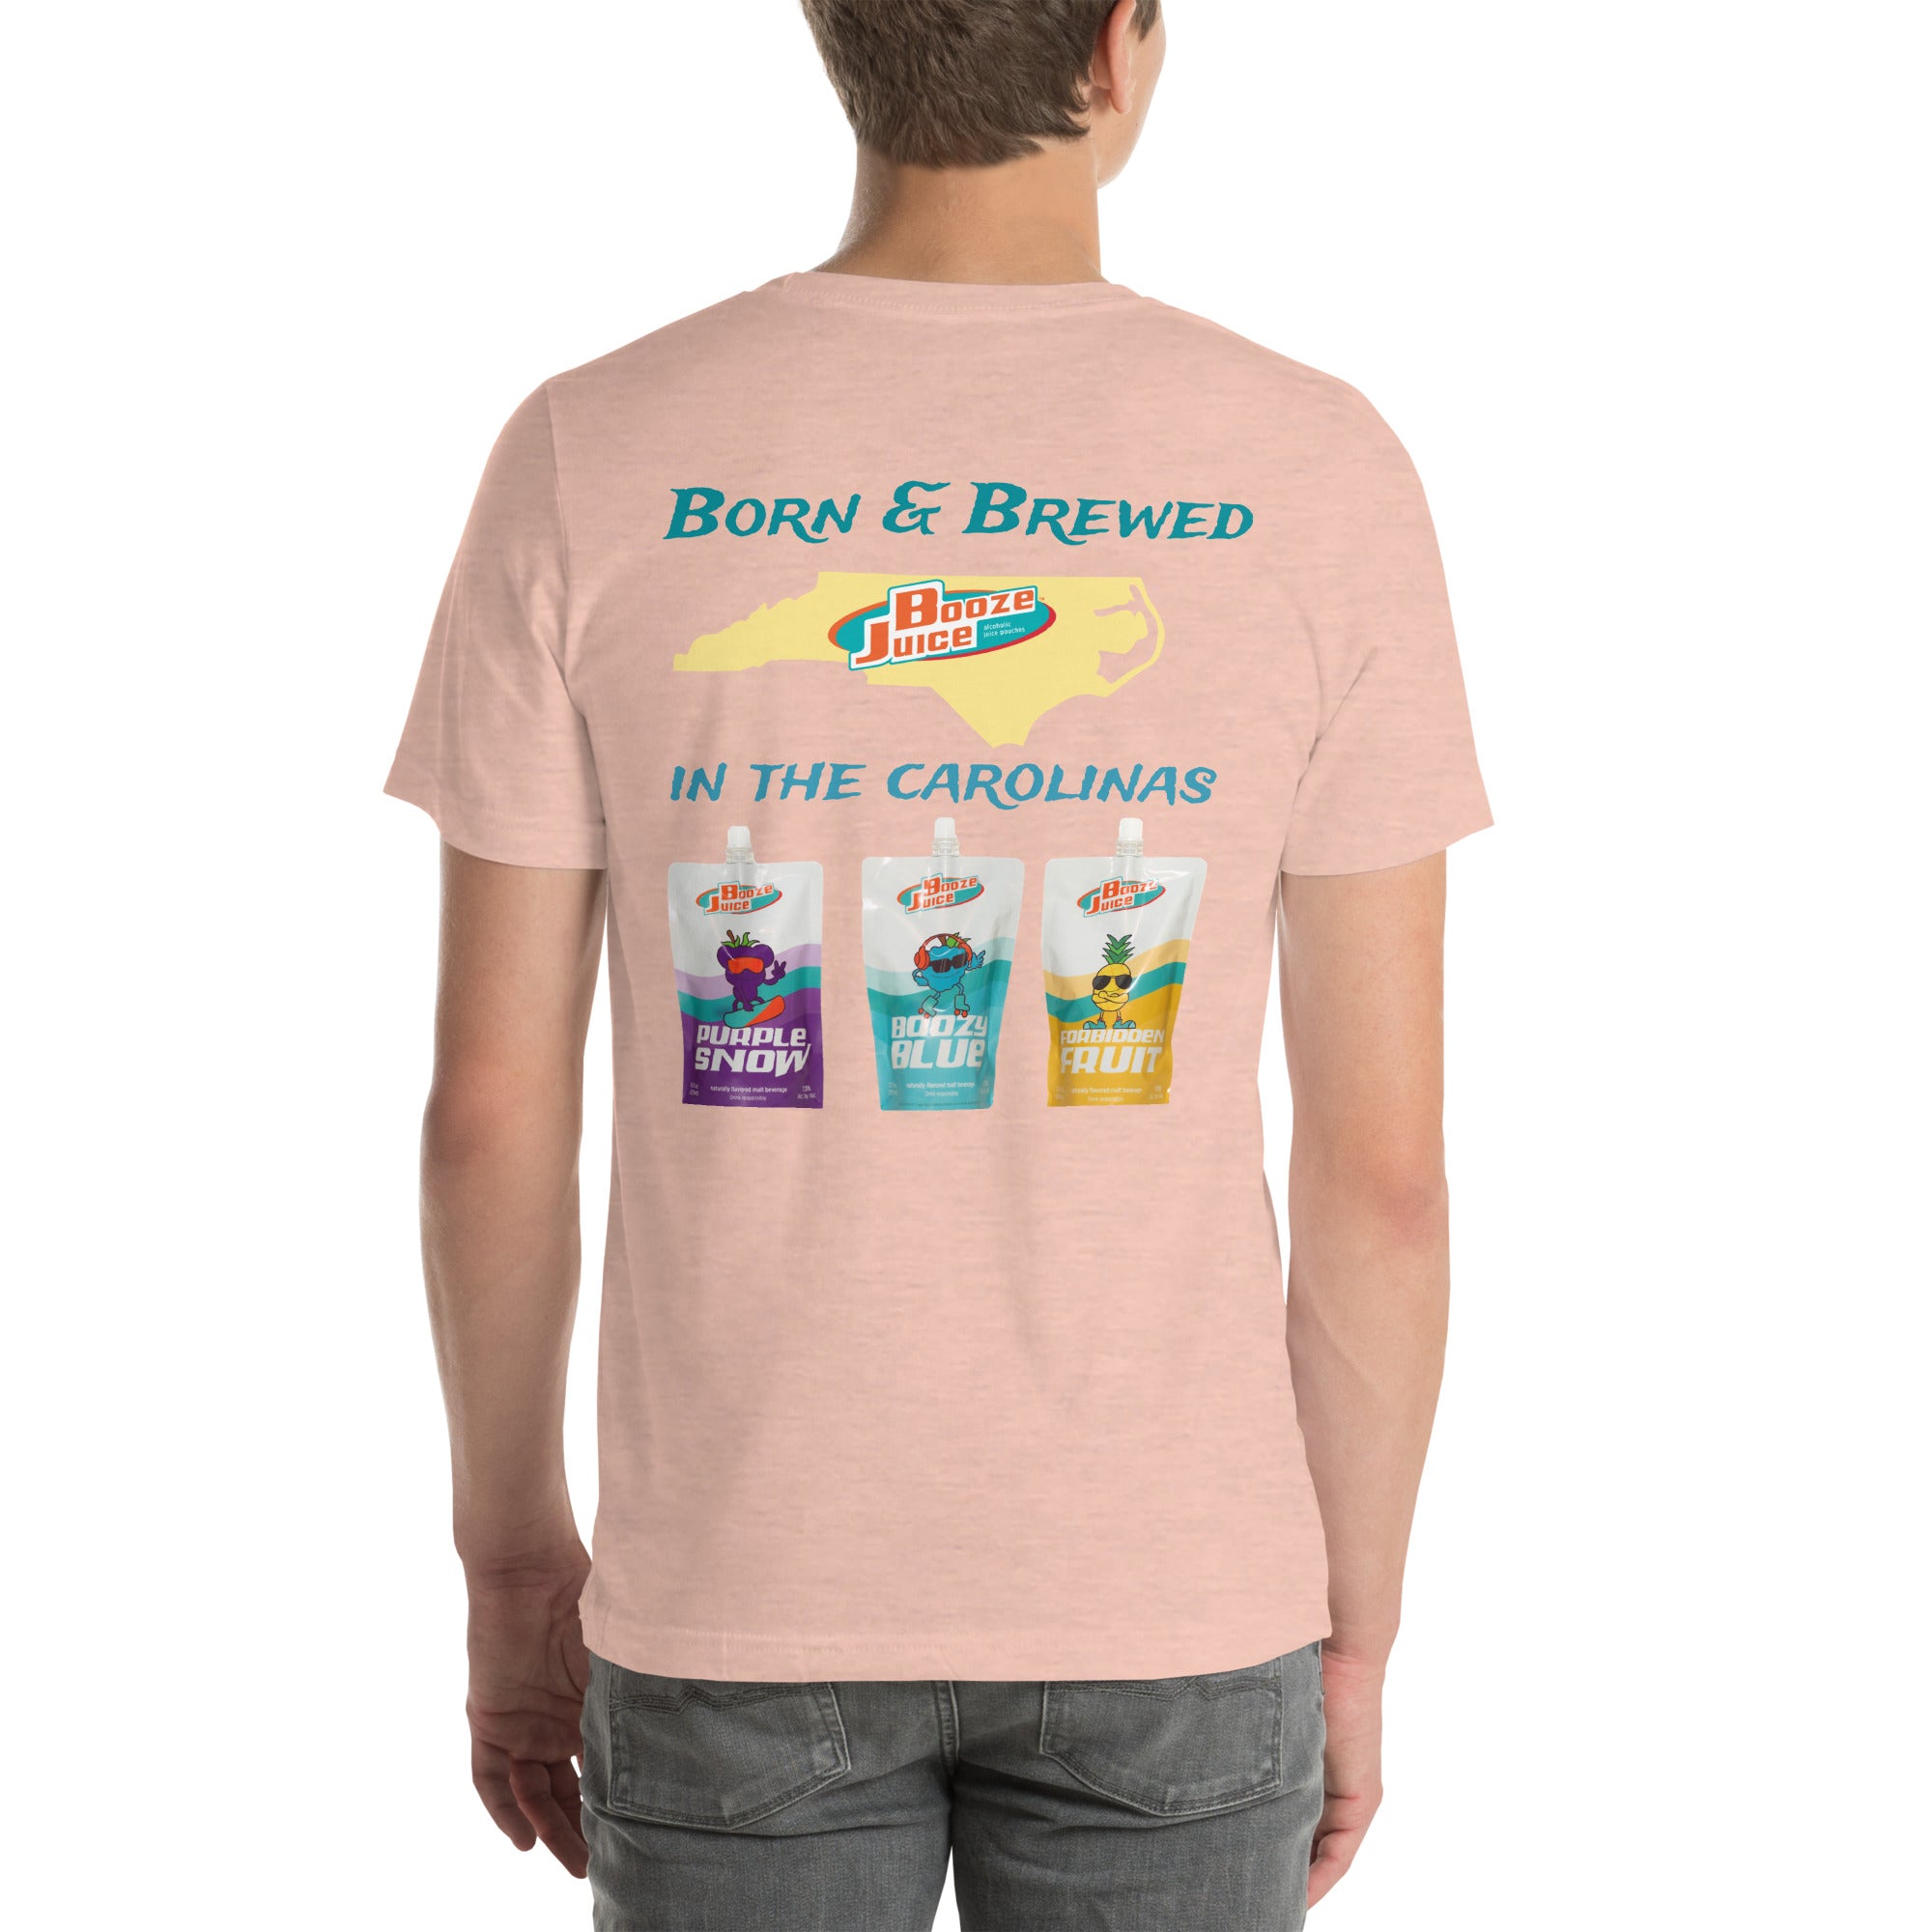 BJ Born and Brewed T-Shirt